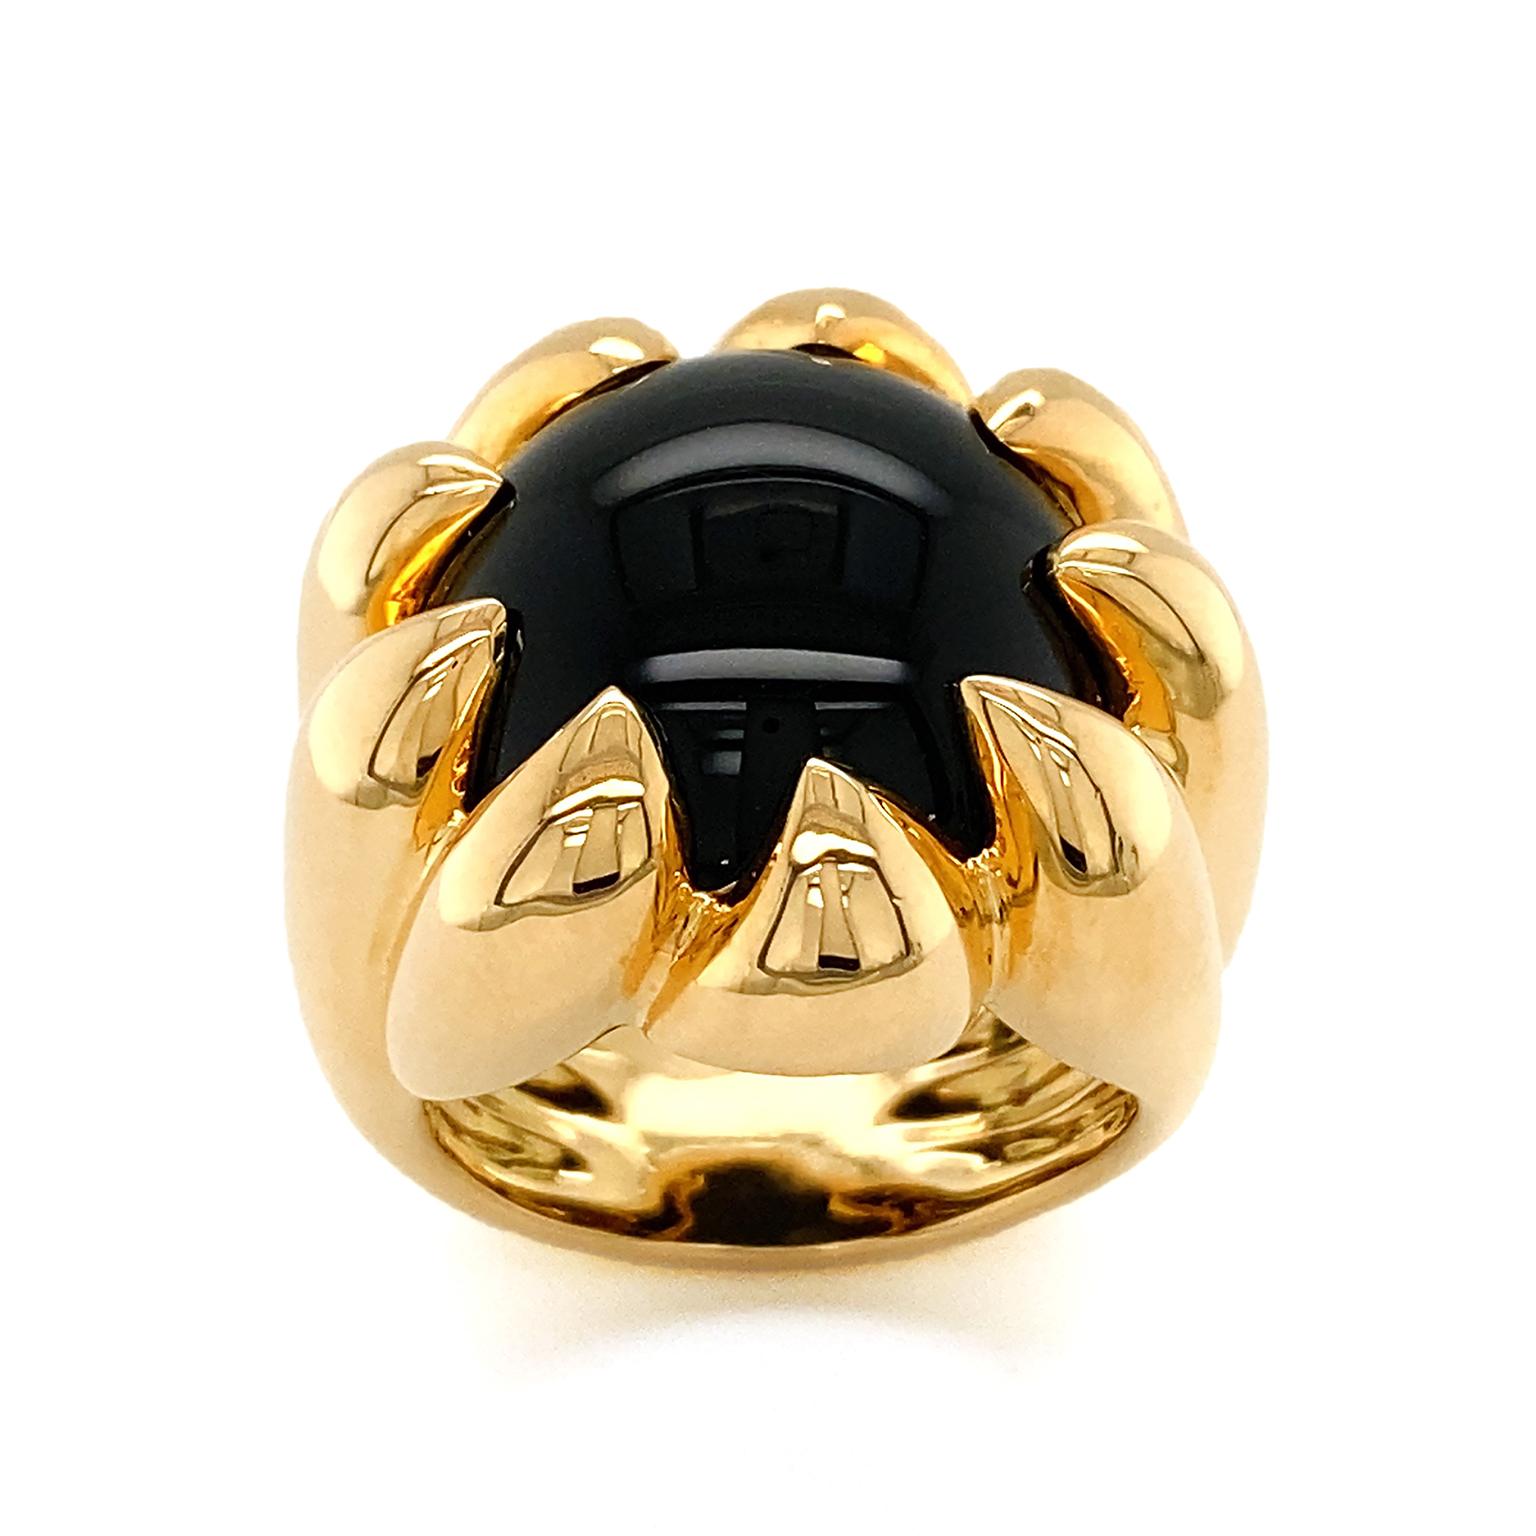 A polished 18k yellow gold band raises to the apex of black onyx. The claw prongs supporting the onyx create striking interest in this gleaming ring. Measurements for the ring are 0.97 inches (width) by 0.91 inches (length) by 1.11 inches (height).